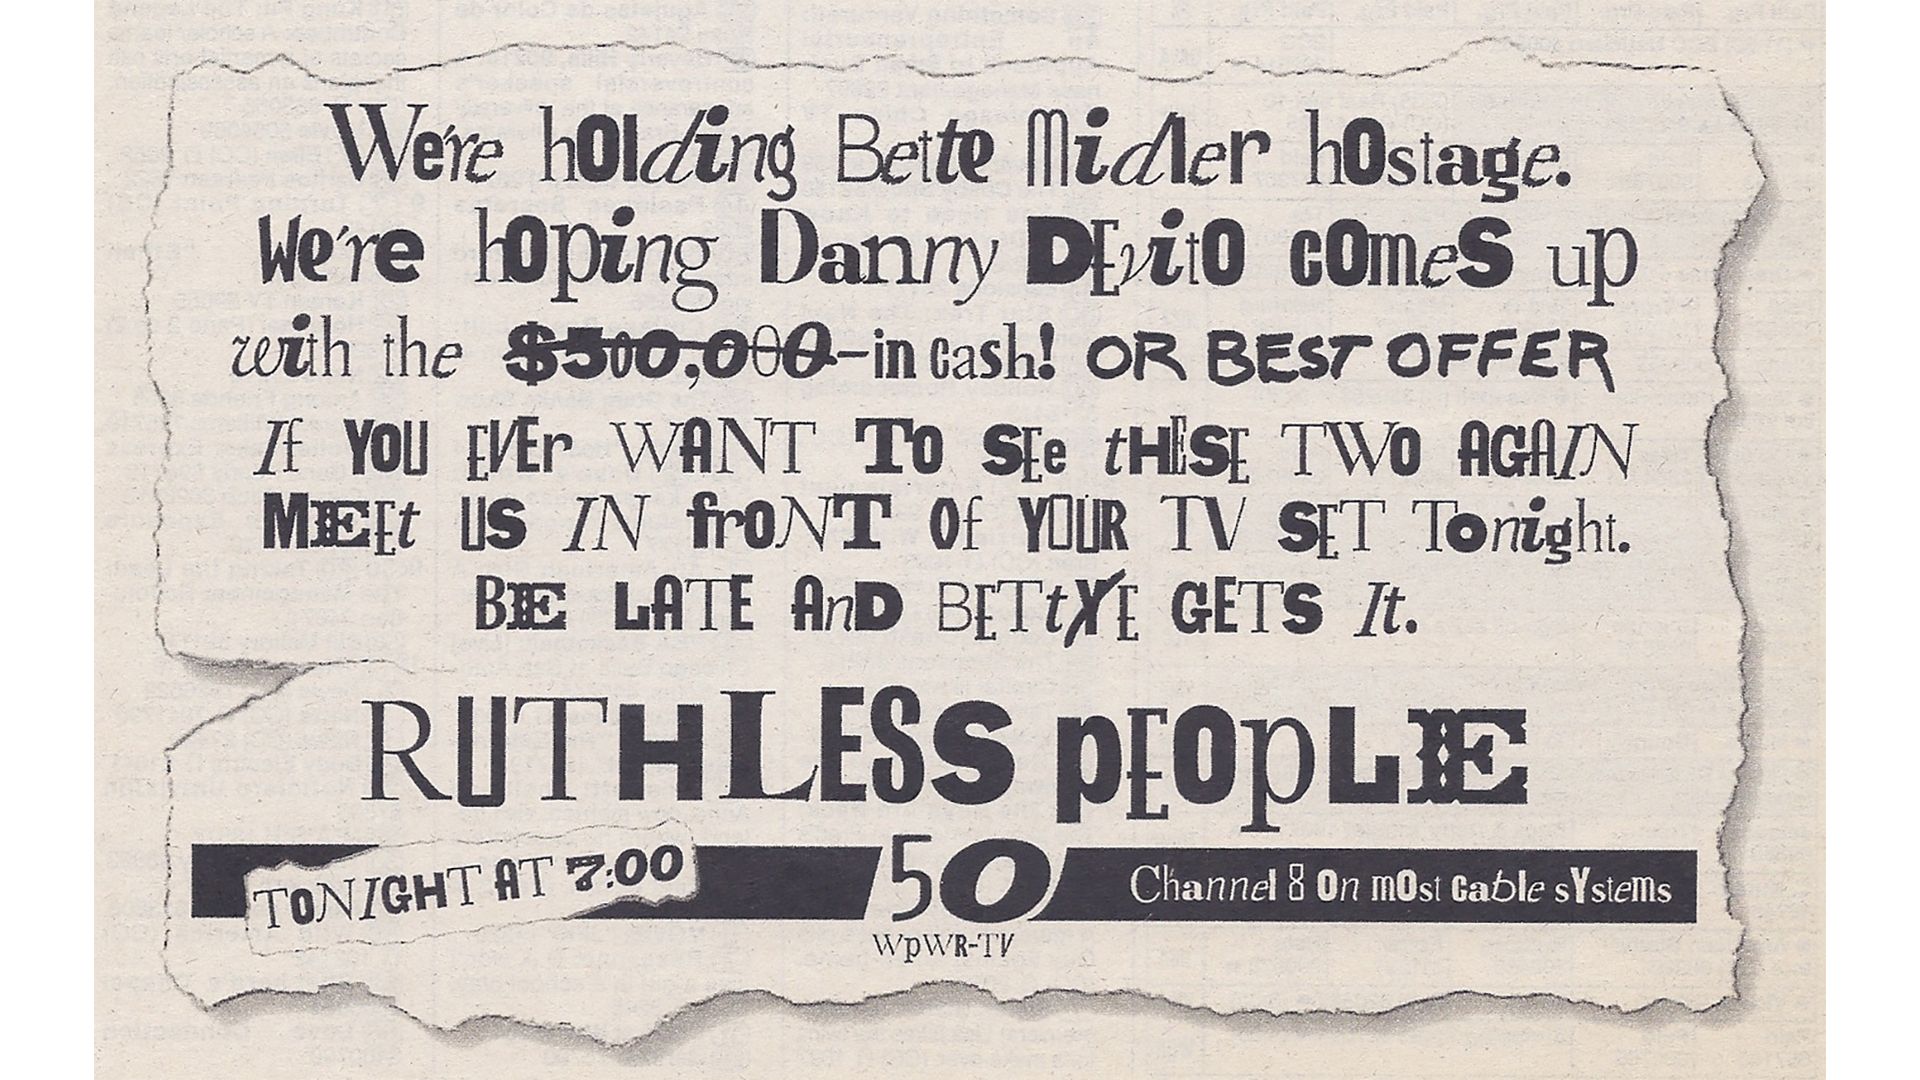 Ruthless People TV Ad UPN Chicago